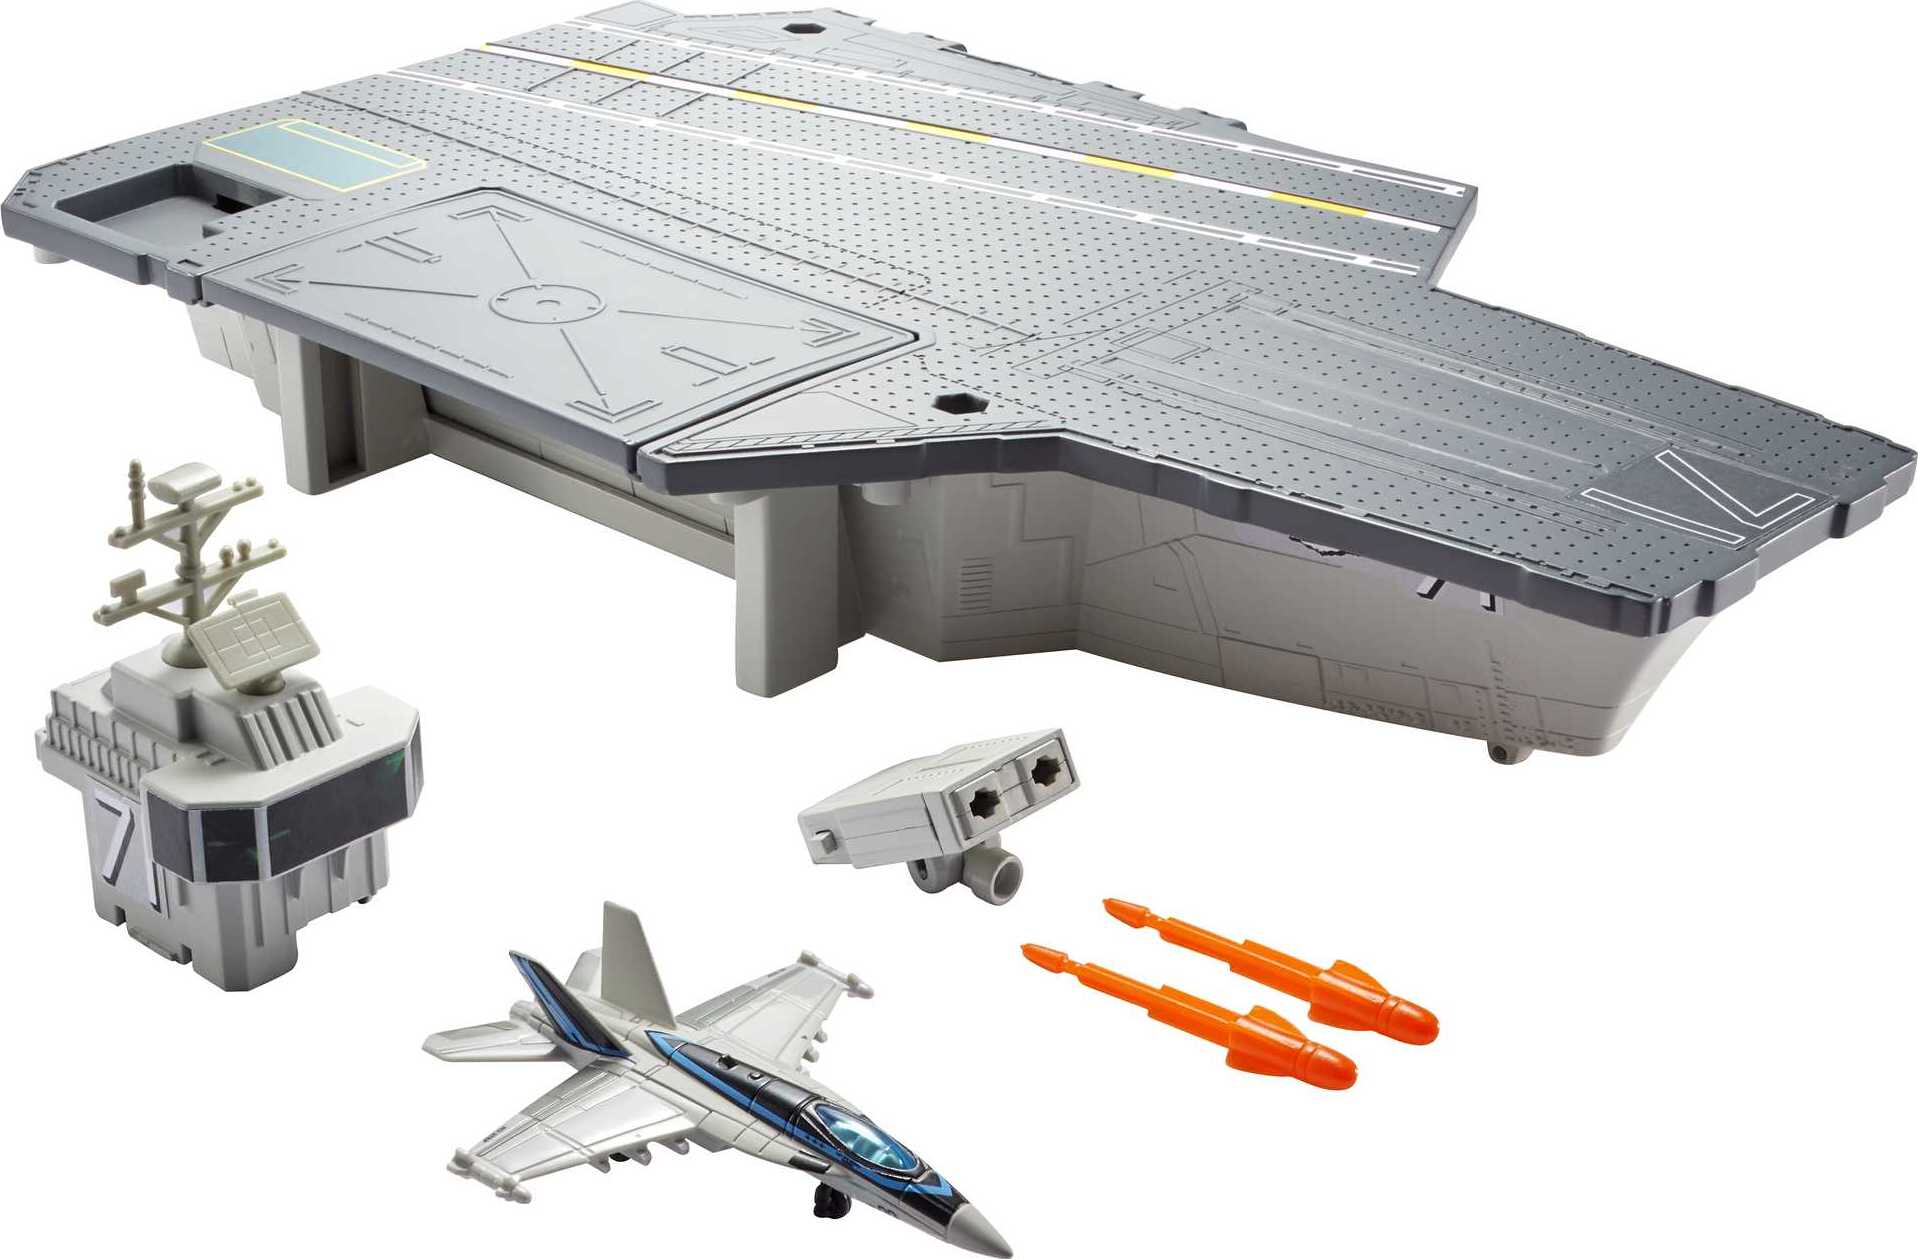 Matchbox Top Gun Aircraft Carrier Play Set Gift Idea for Ages 4 to 8 years - image 1 of 8